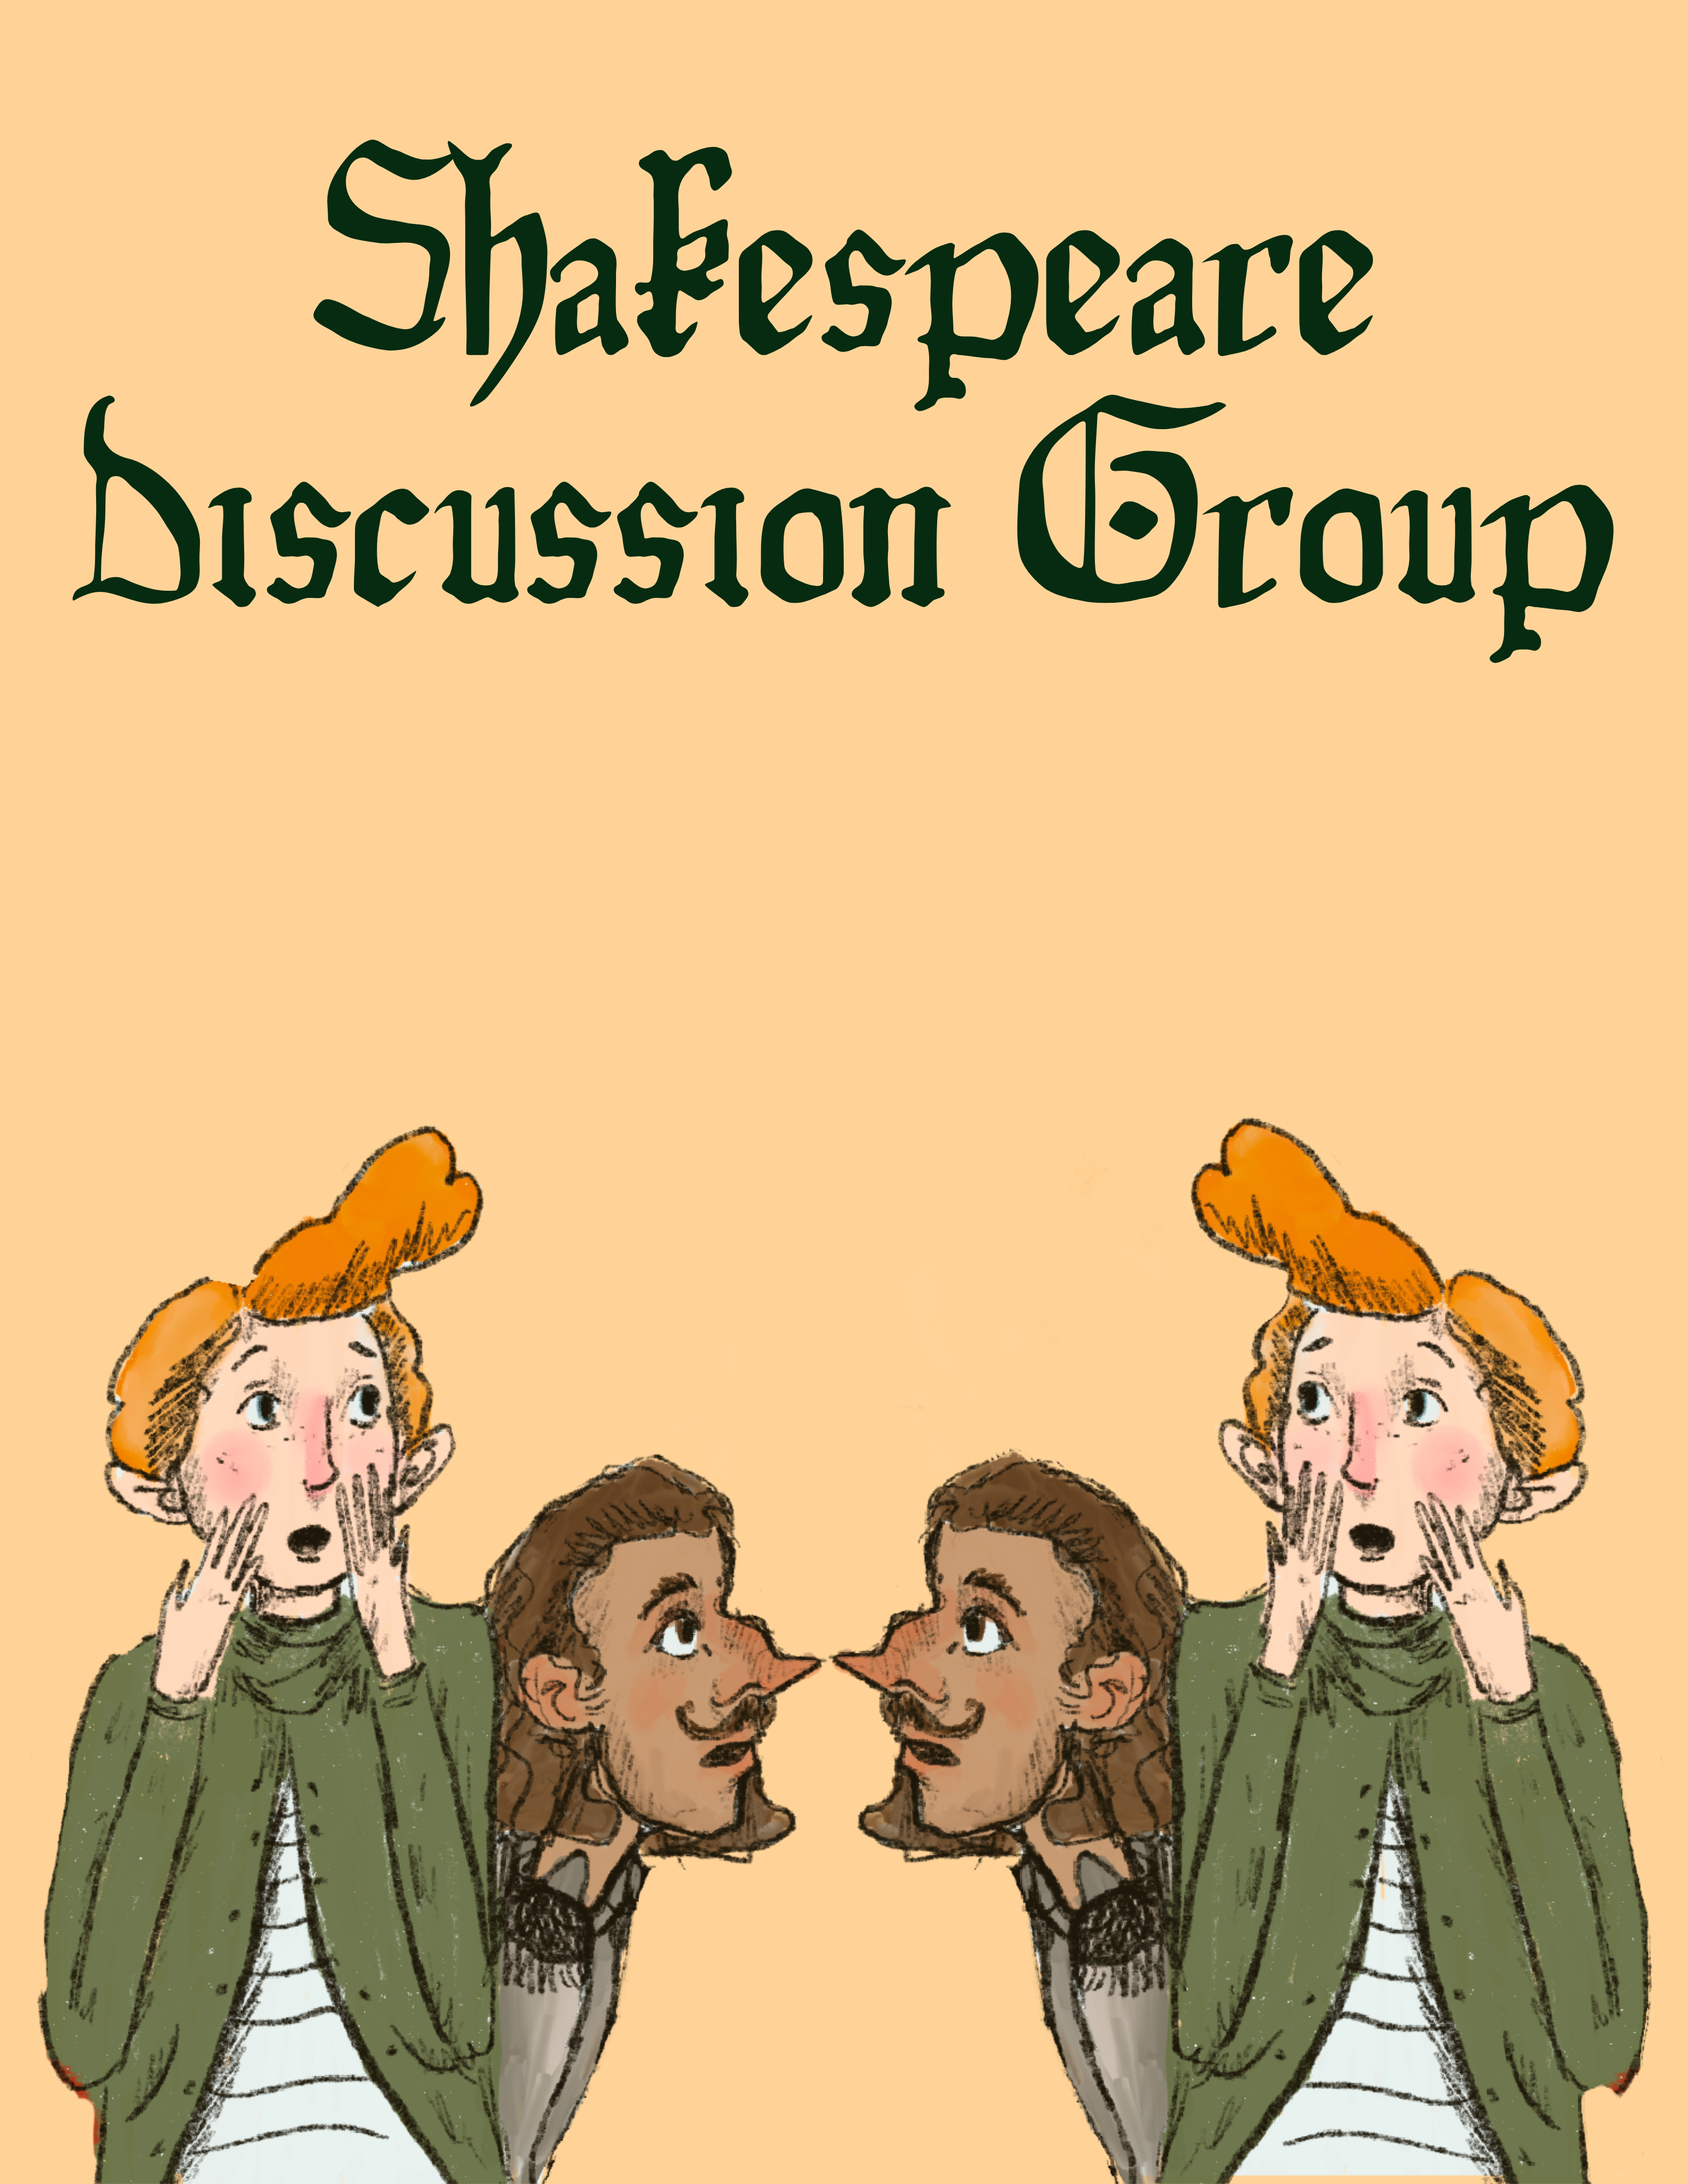 Shakespeare Discussion Group, Twins male and female talking